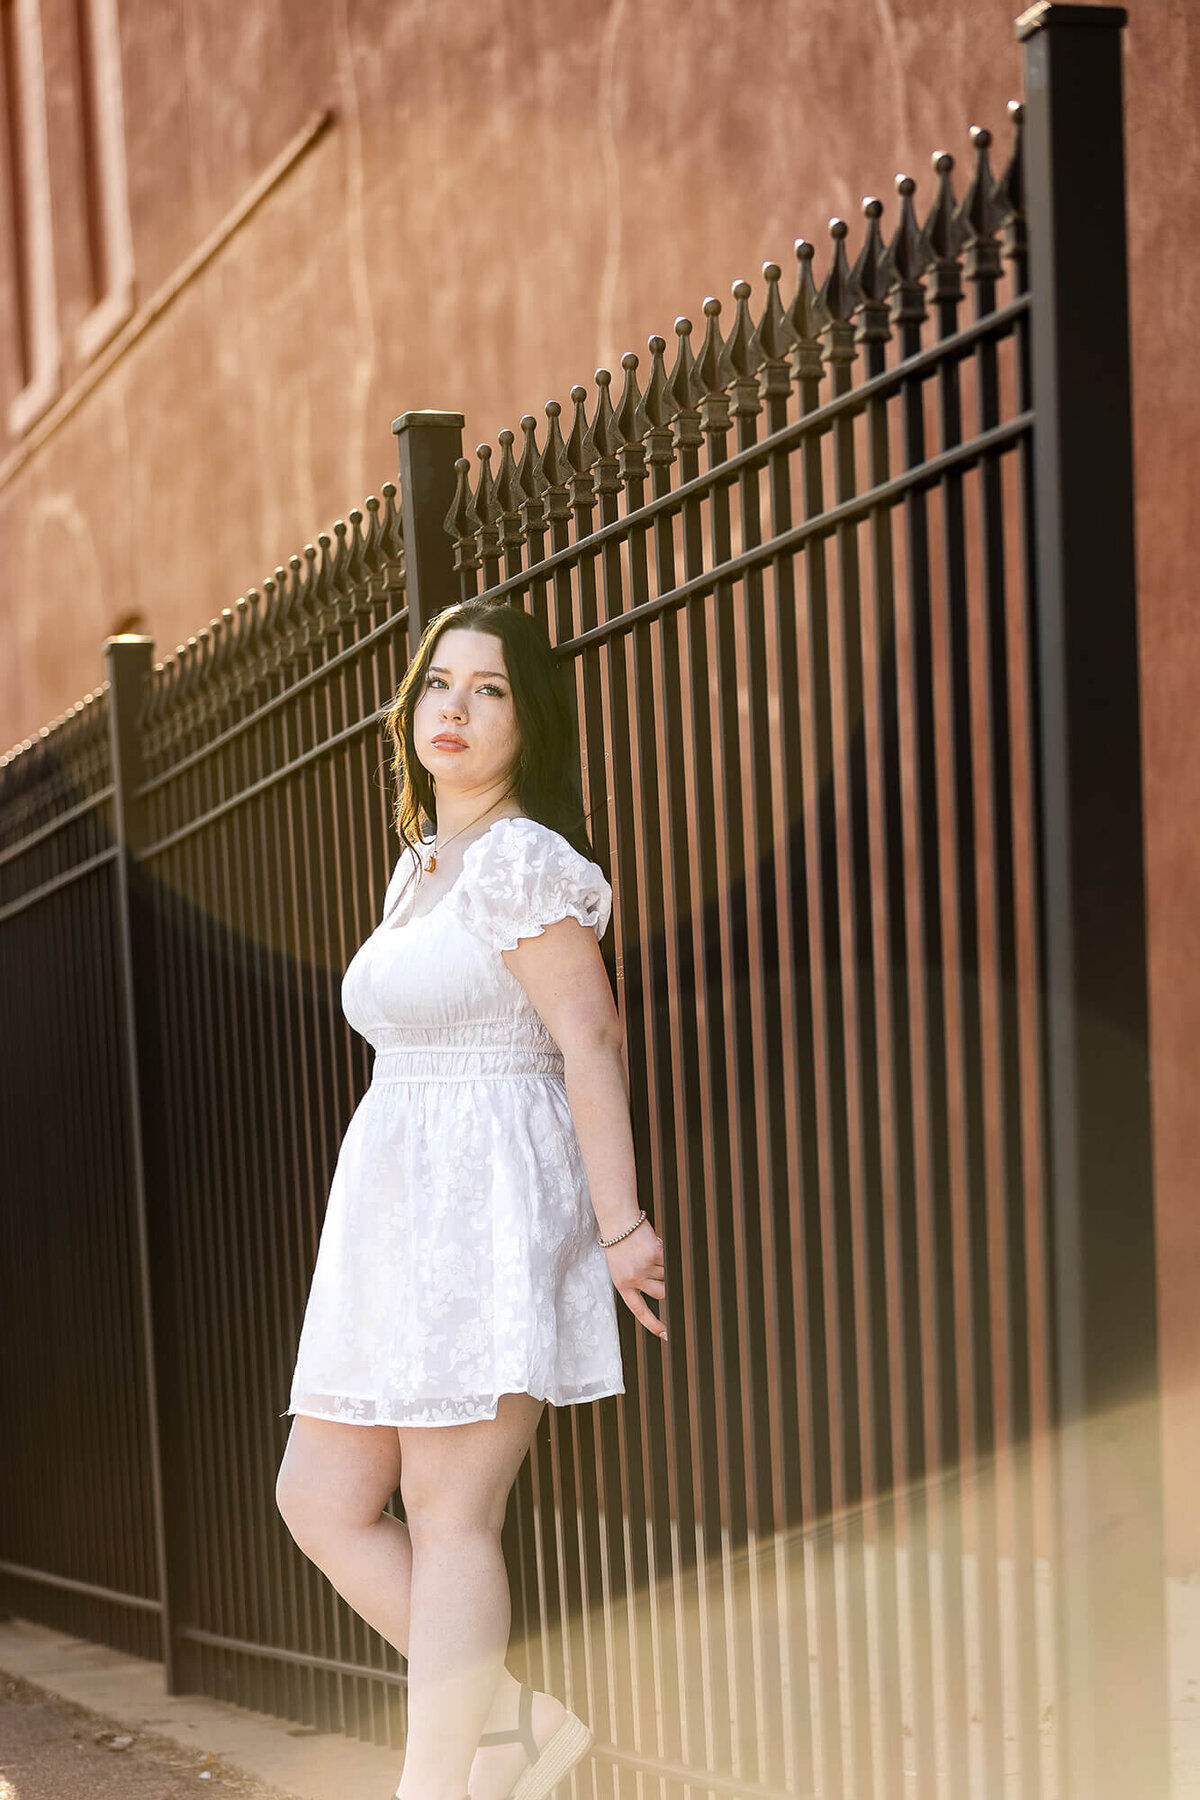 Senior girl wearing a white dress stares off into the distance during her senior photoshoot.